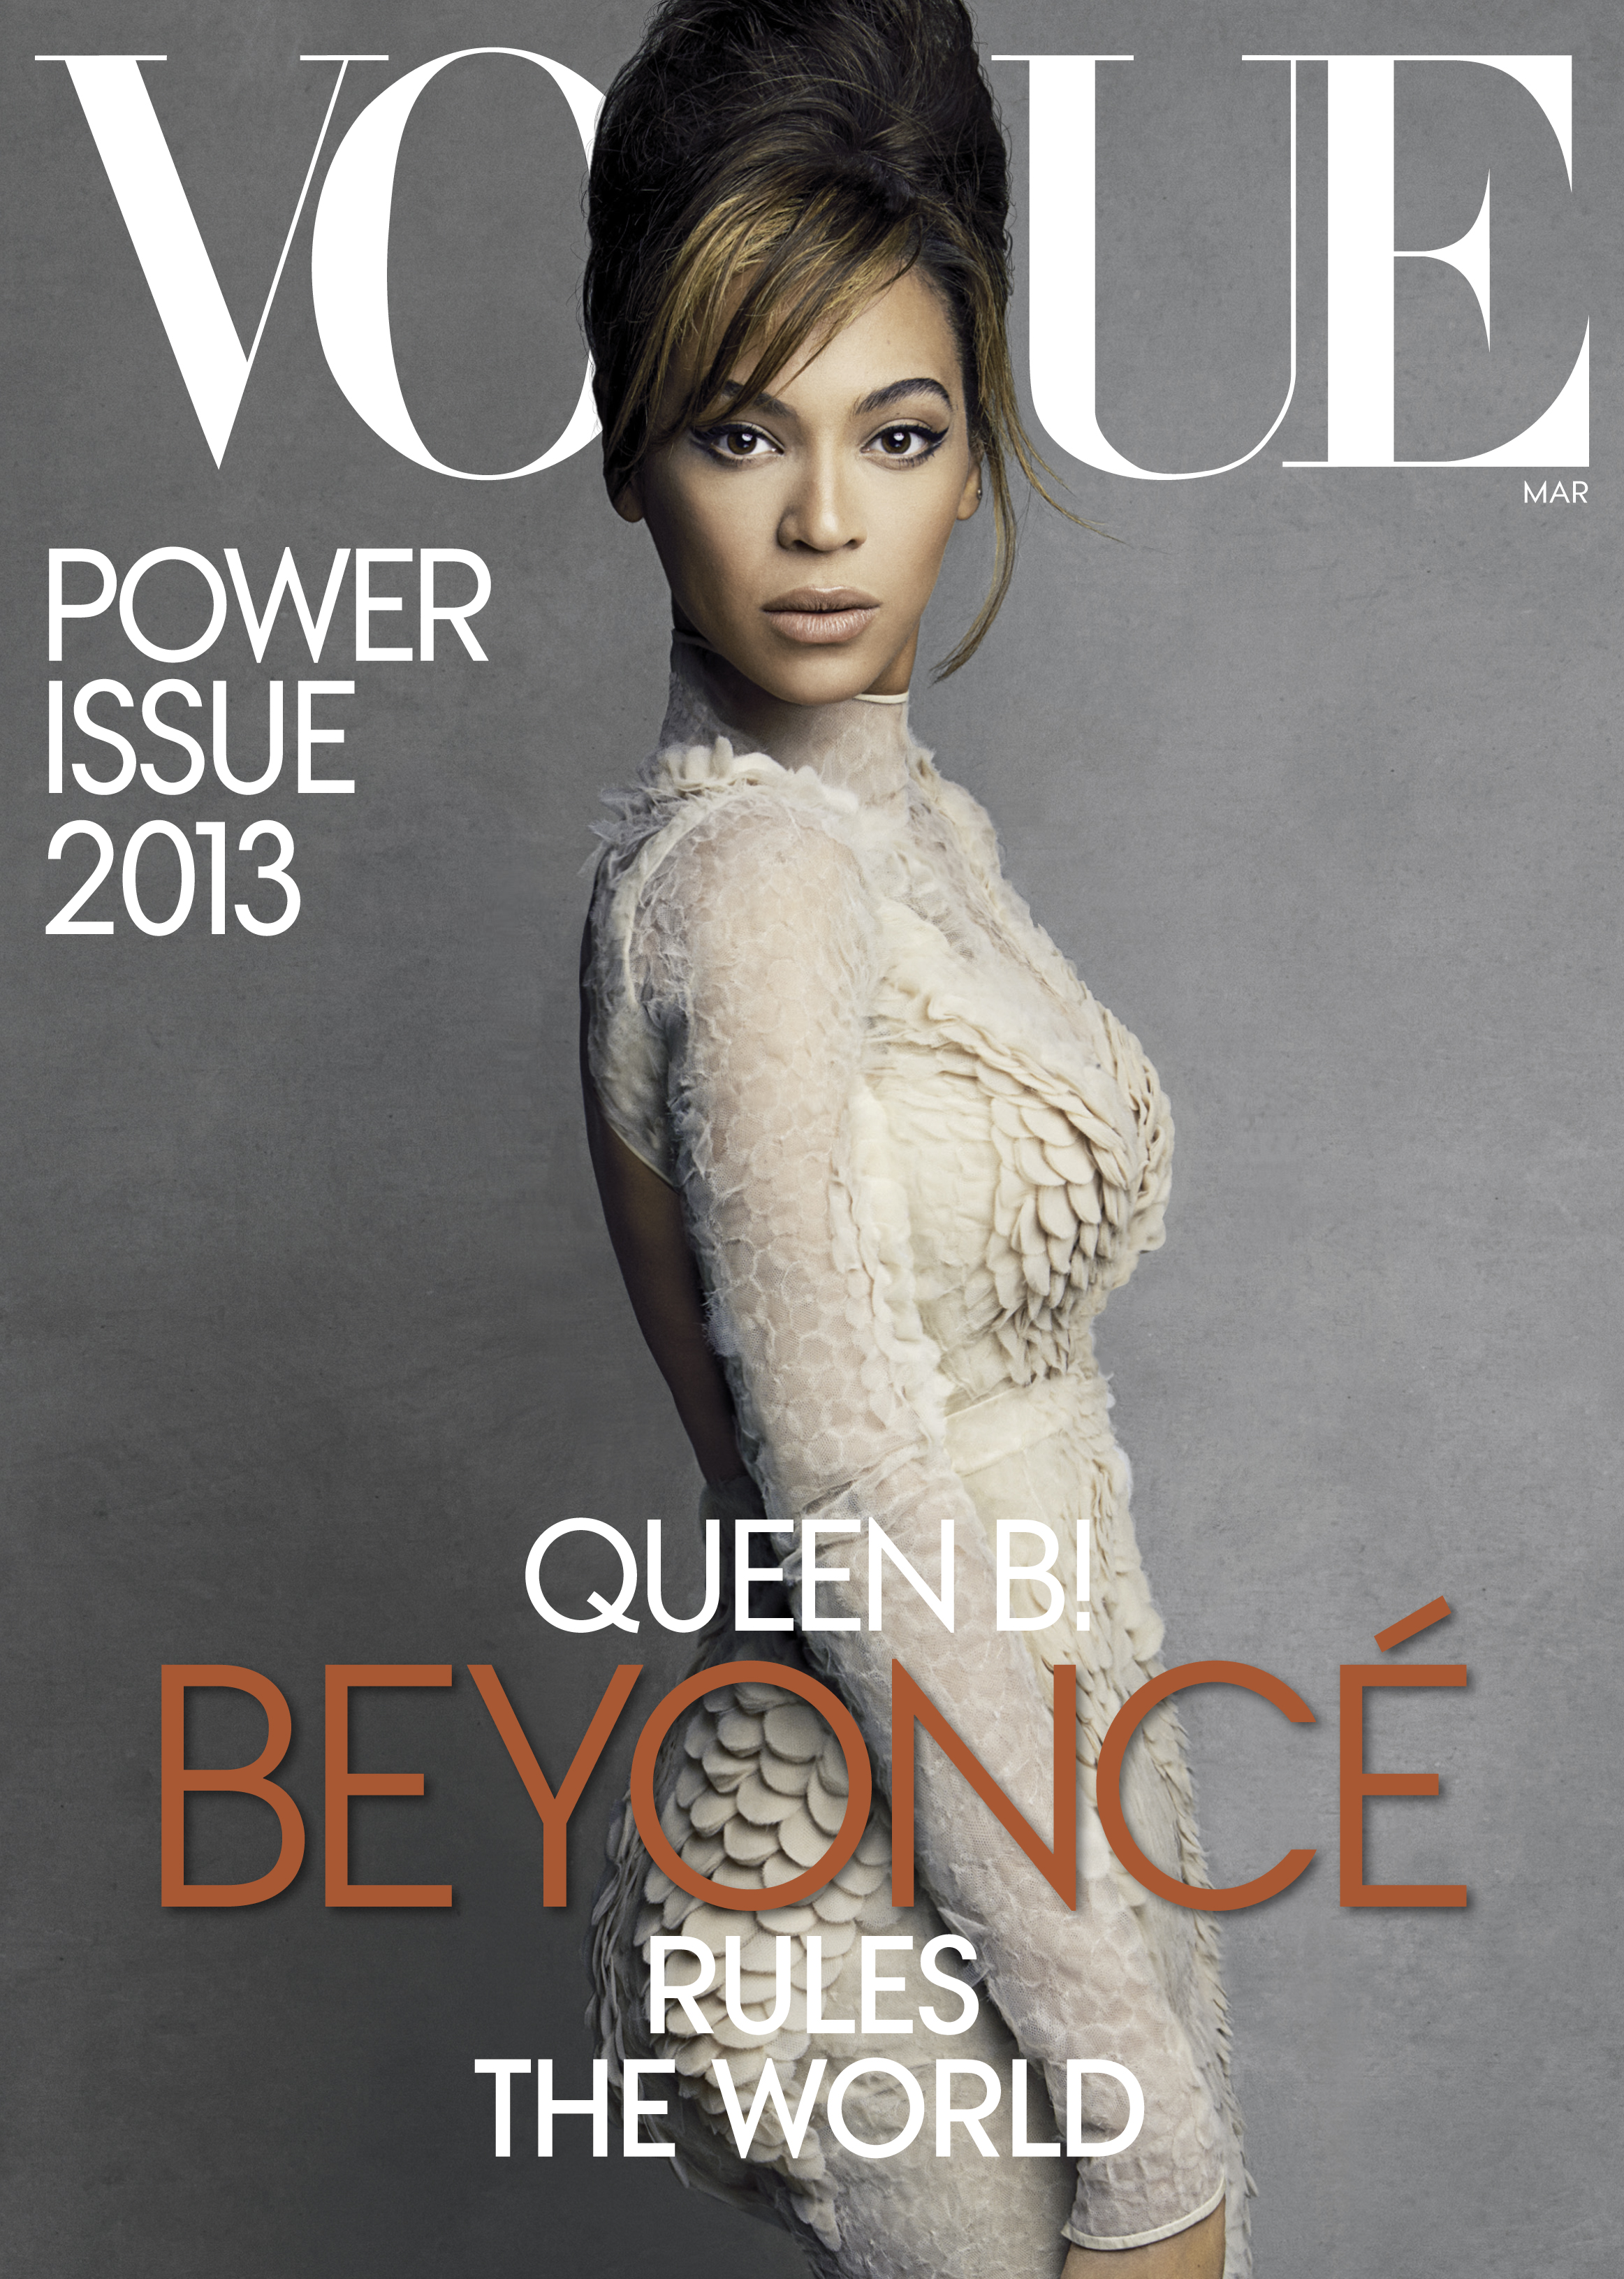 Vogue-March, "Power Issue"